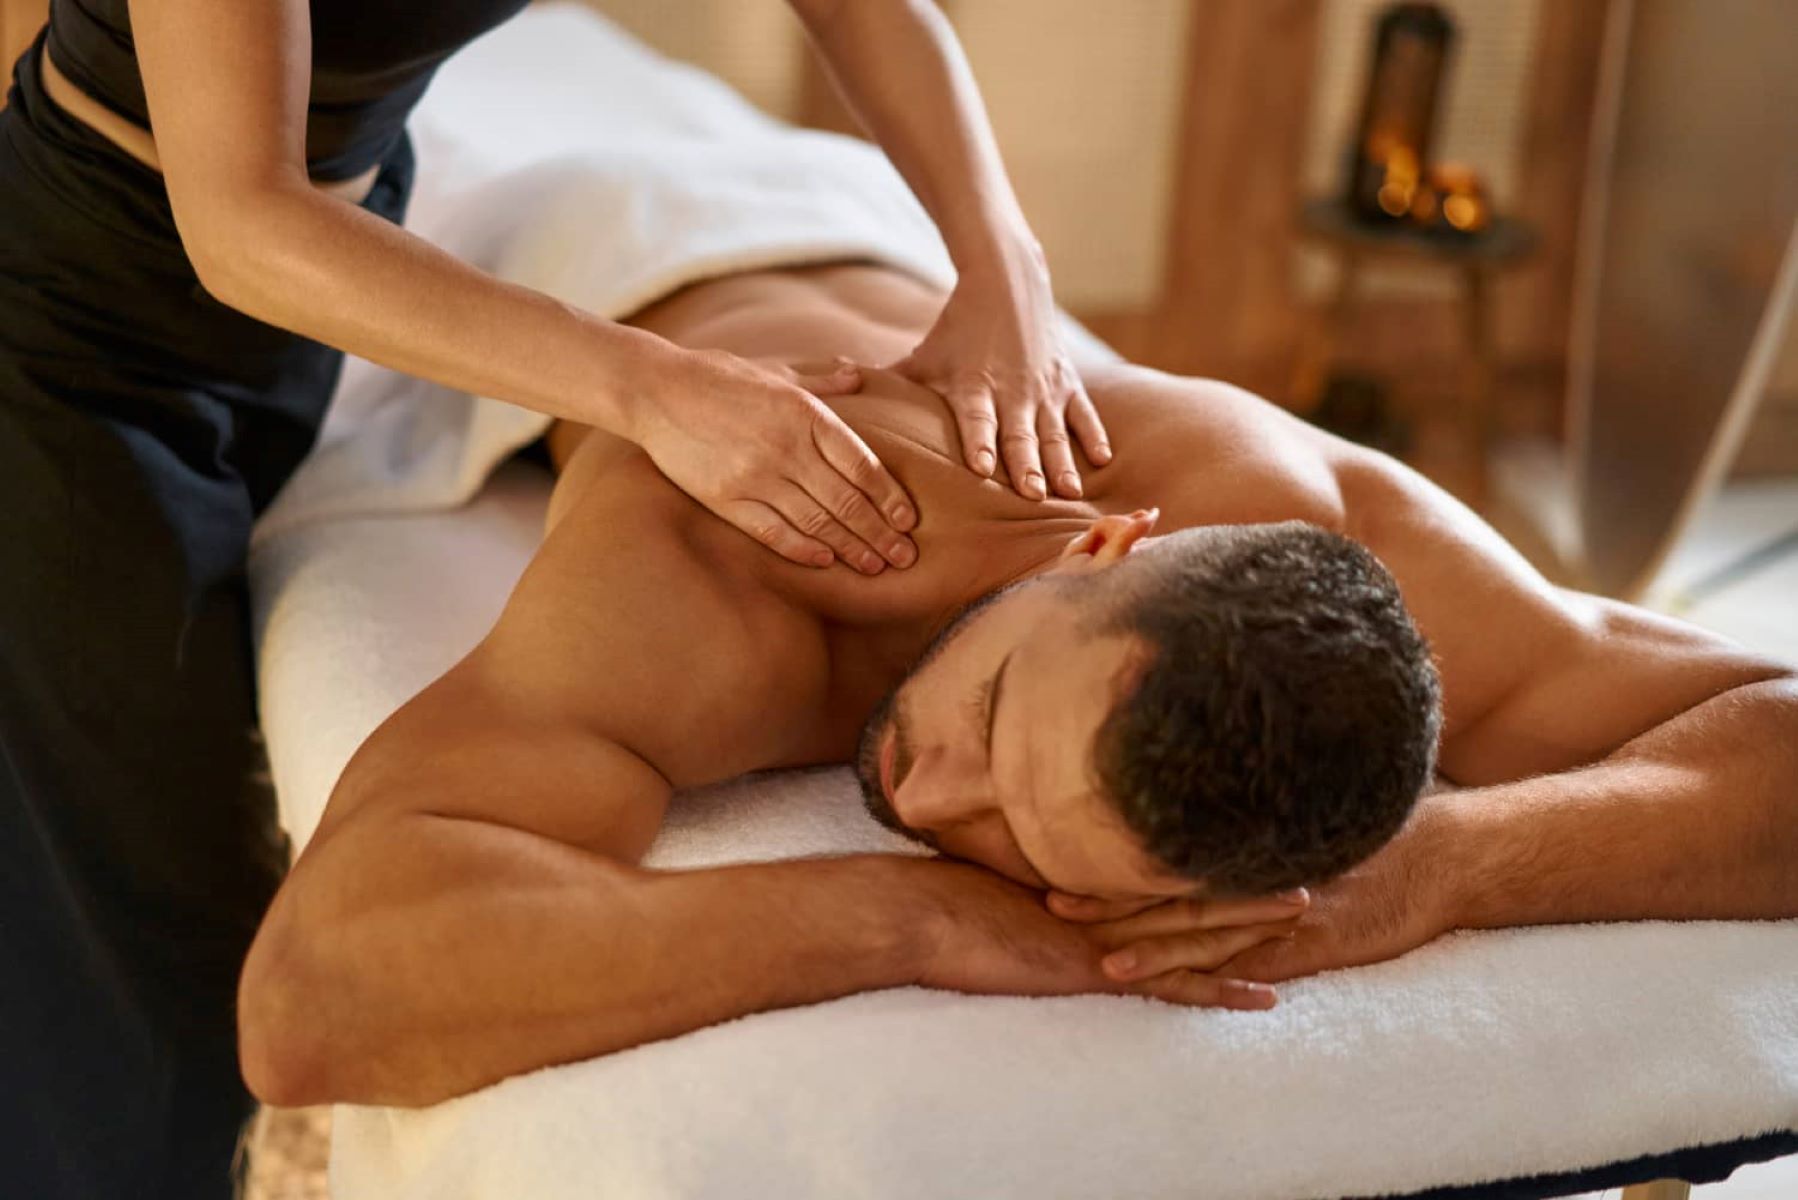 Discover The Best Way To Find A Trustworthy Masseuse Offering Extra Services In Dallas, TX!